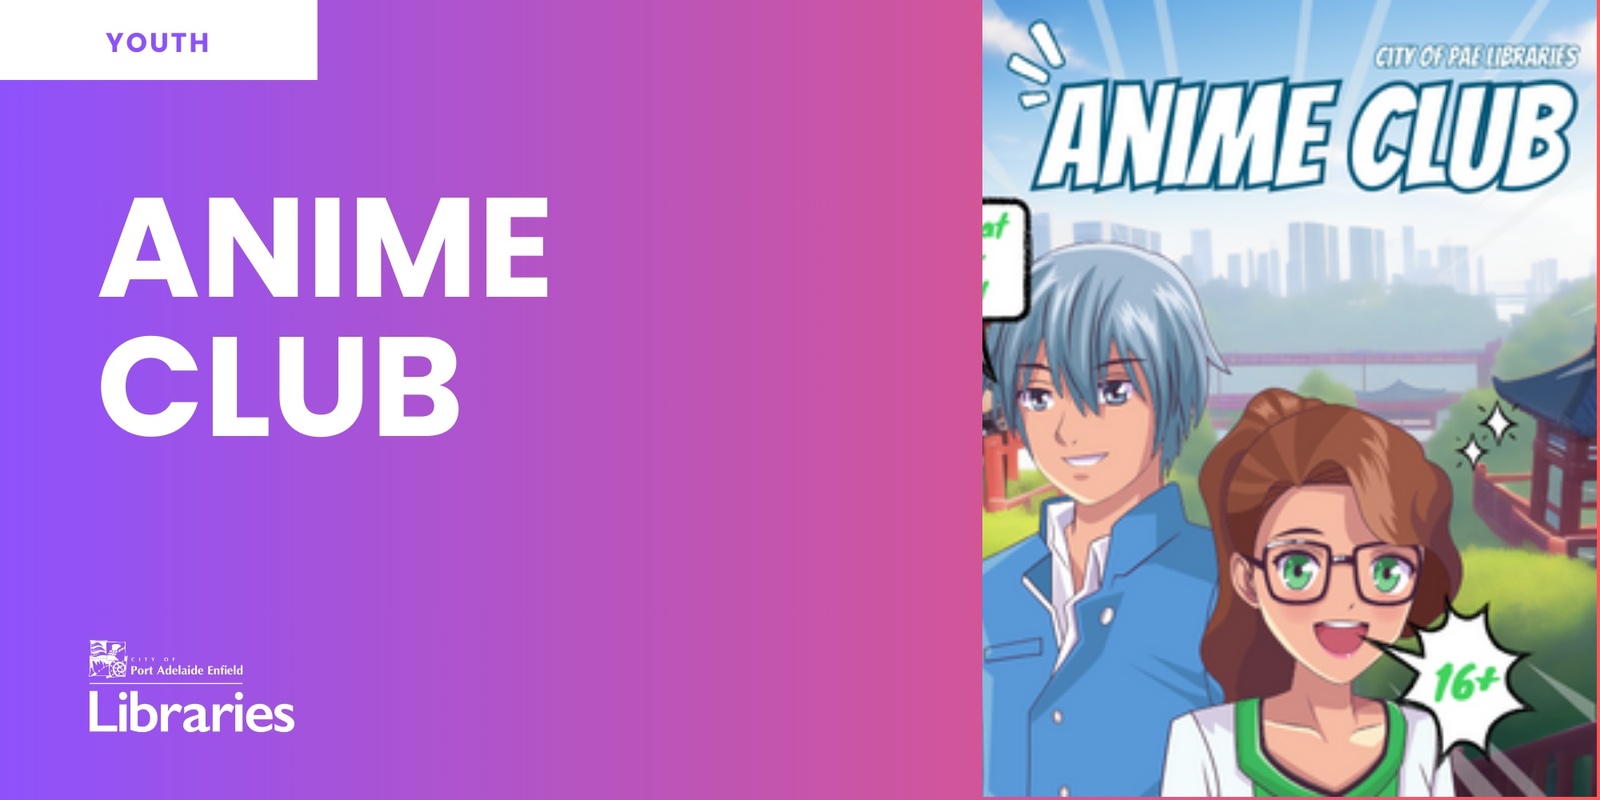 Banner image for Anime Club